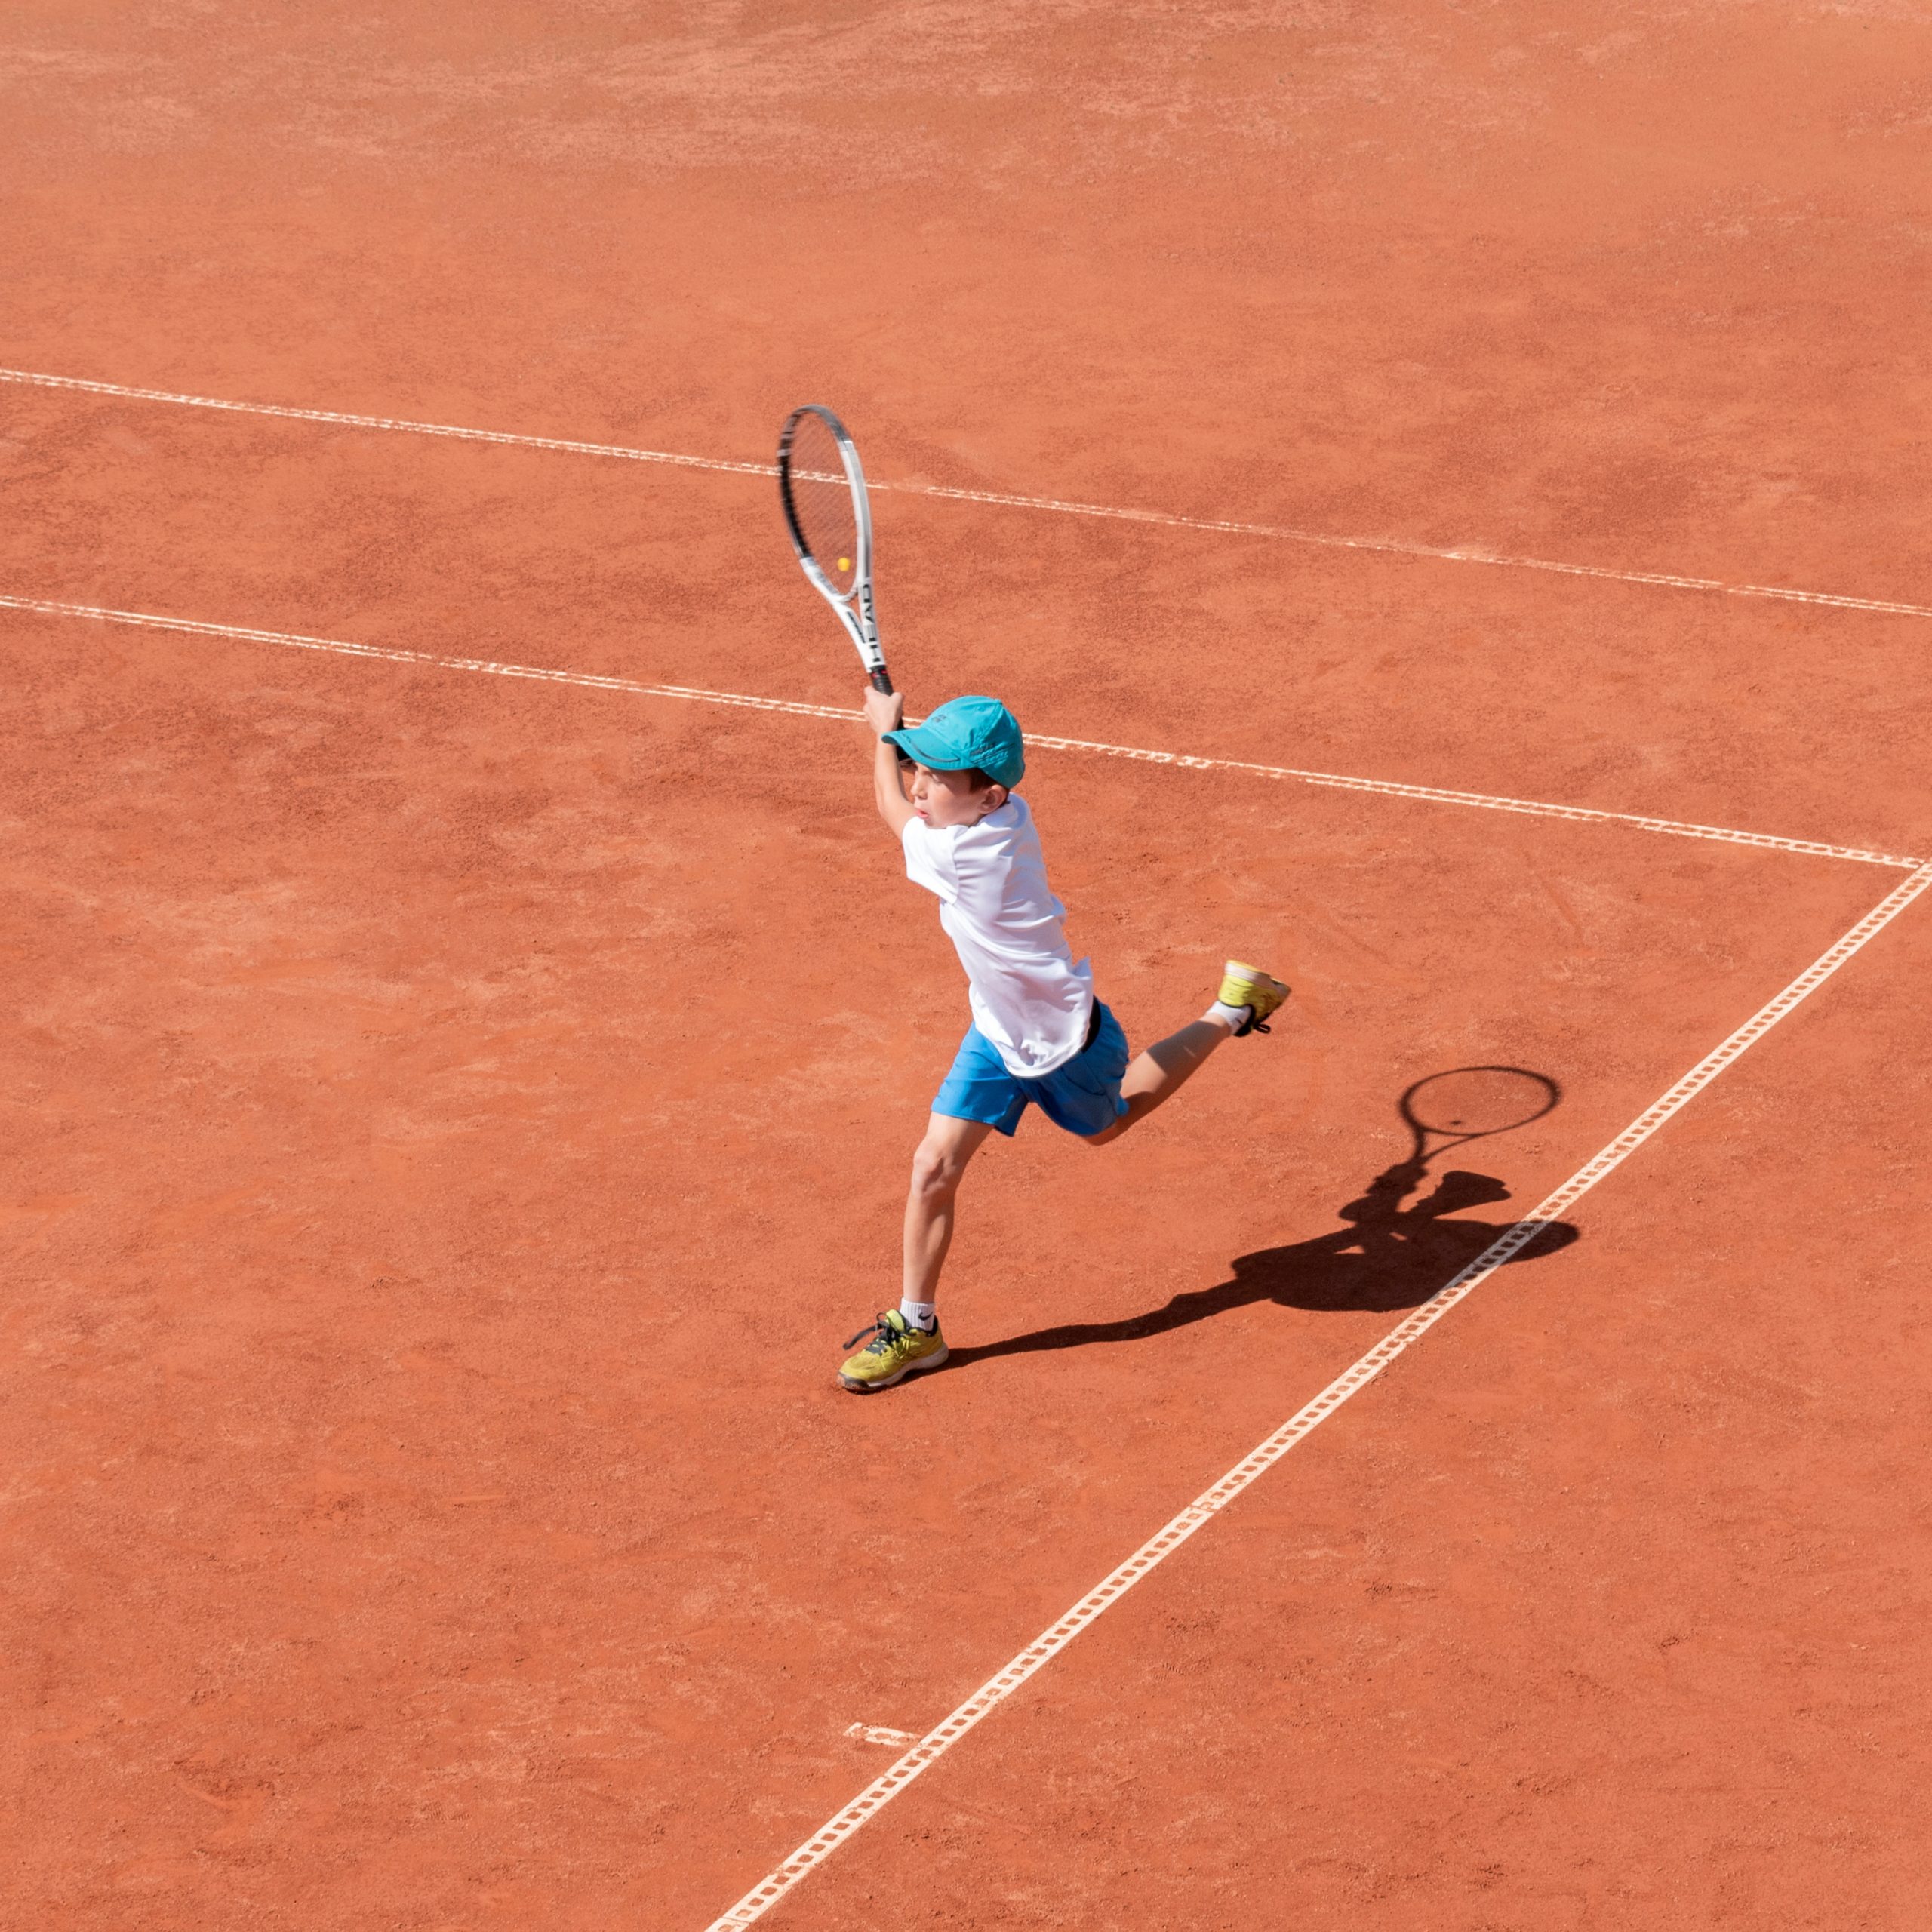 A boy plays tennis on a clay court. A little tennis player focused on the game and shot in flight after hitting the ball. Sports action frame. Active games. Square size.